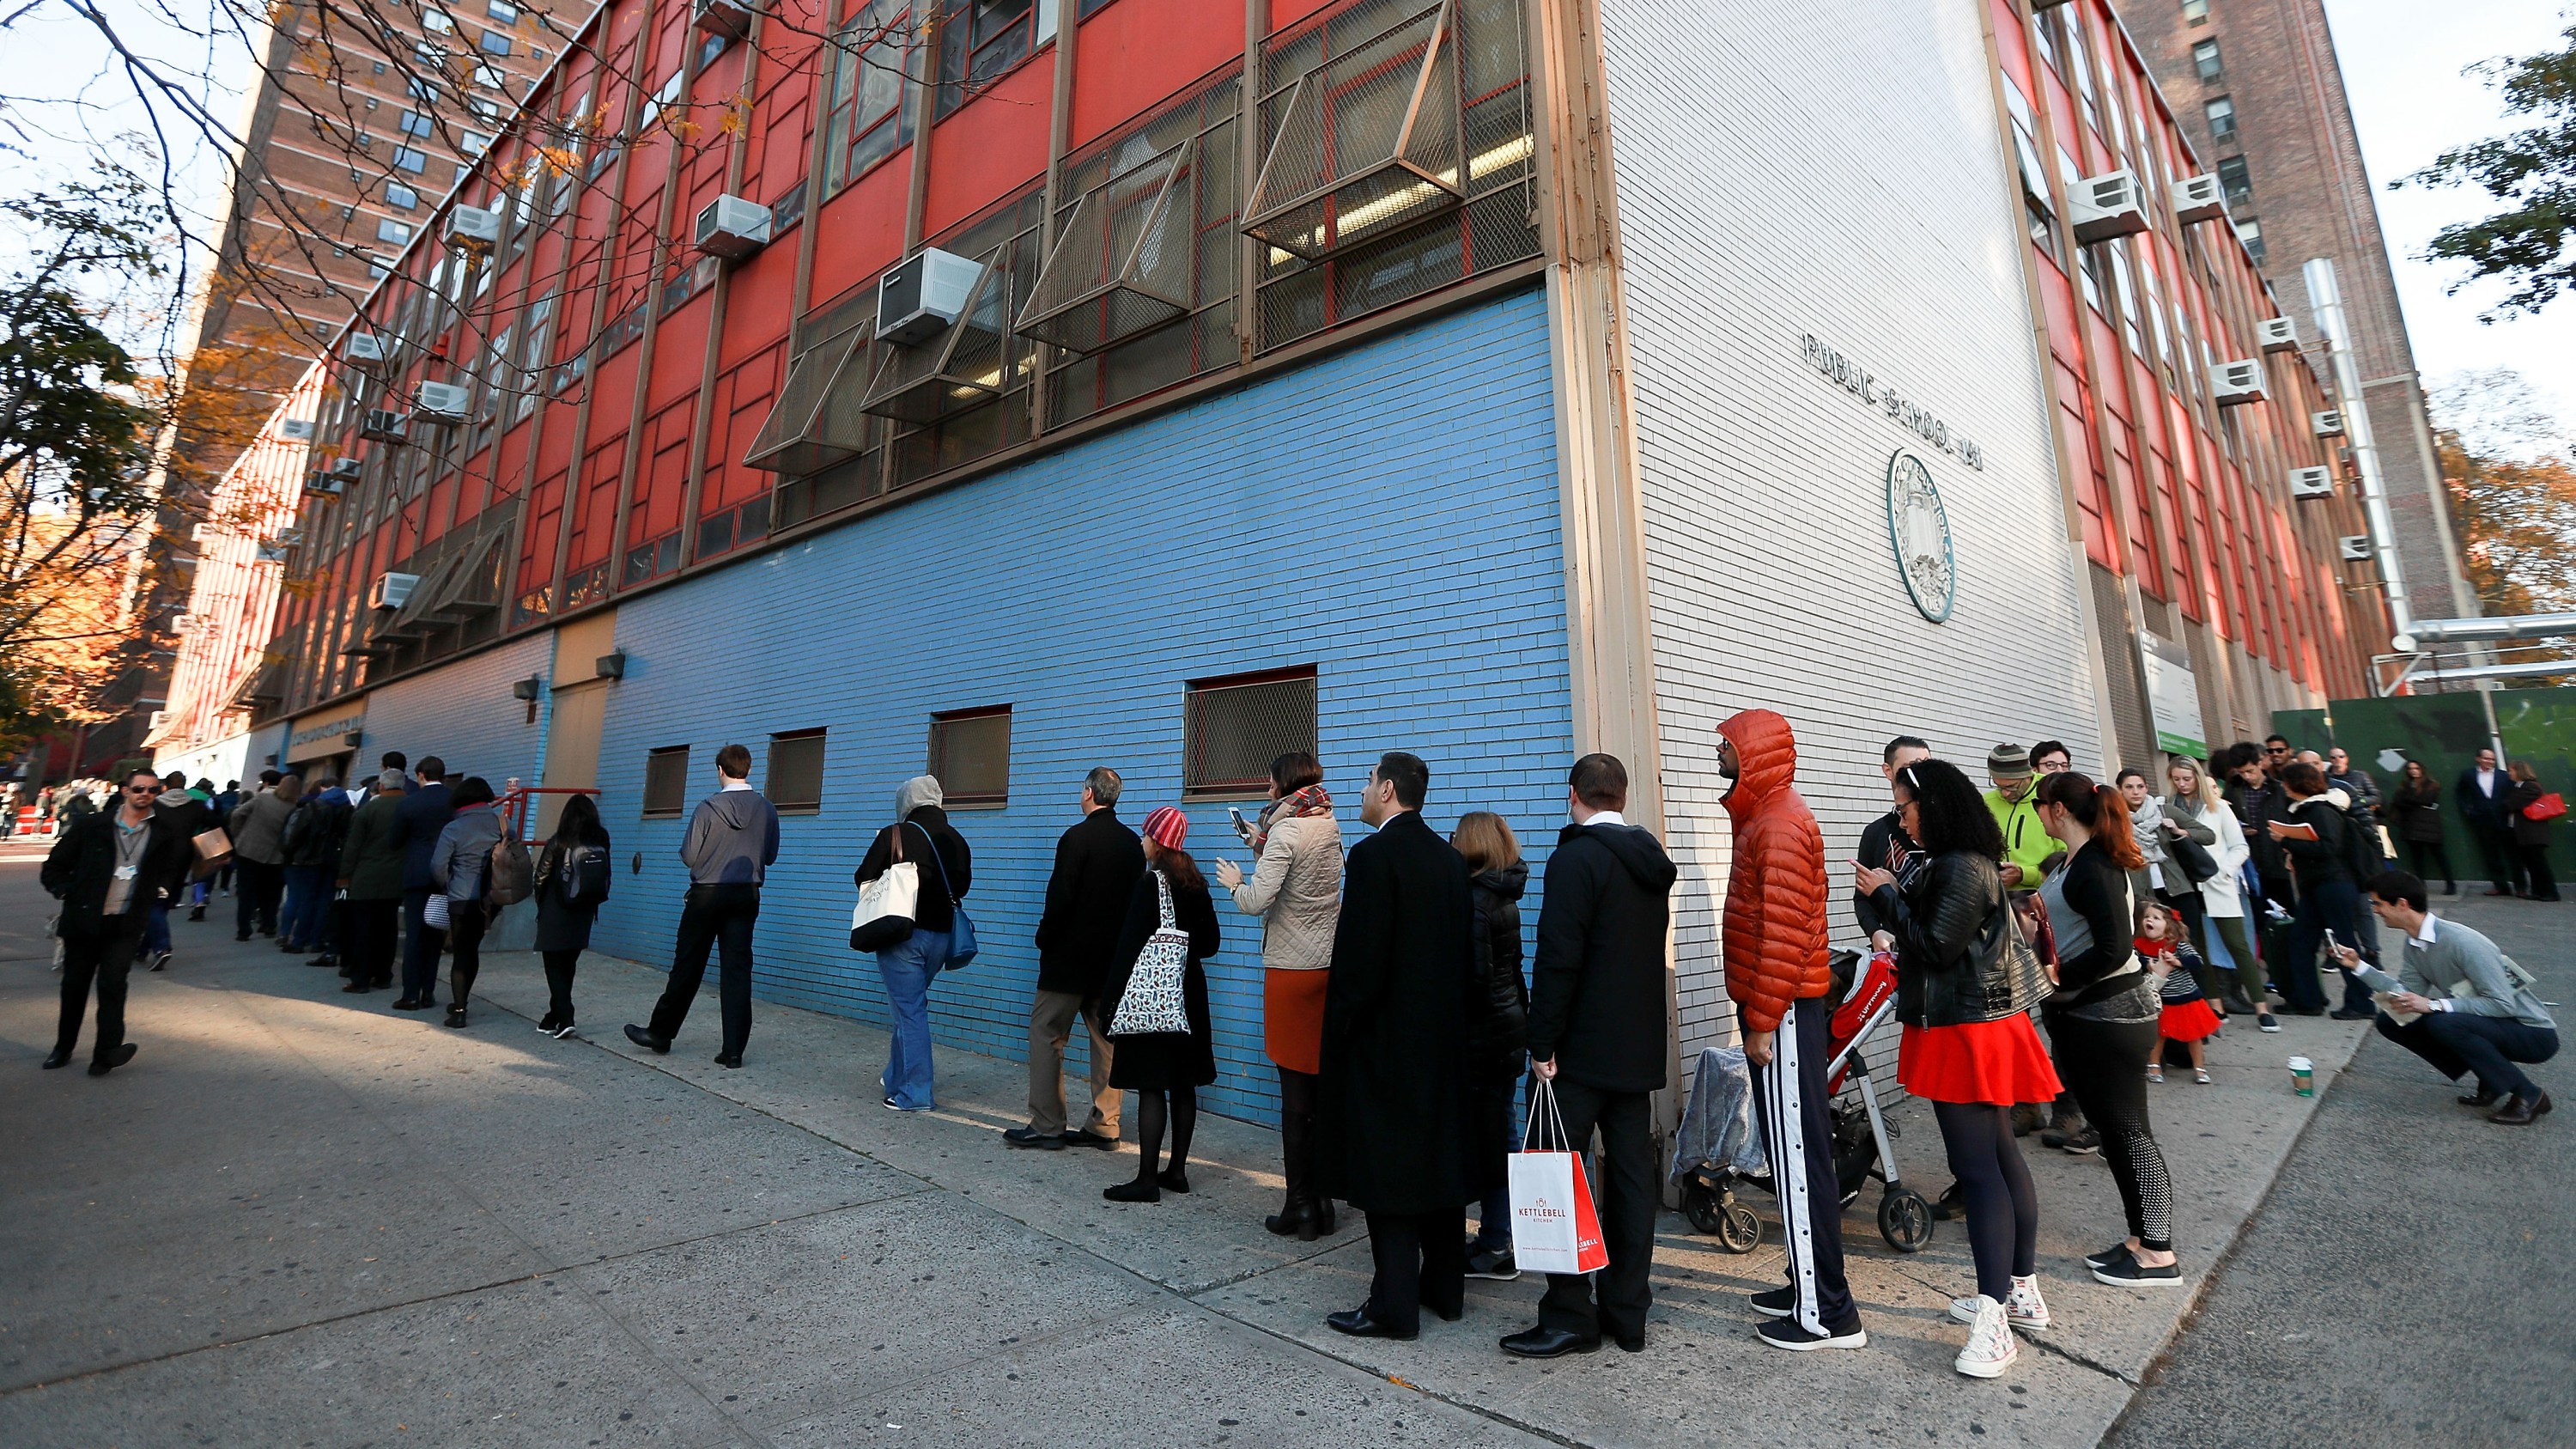 ines of voters wrap around the outside of PS198M The Straus School as they wait to cast their ballots